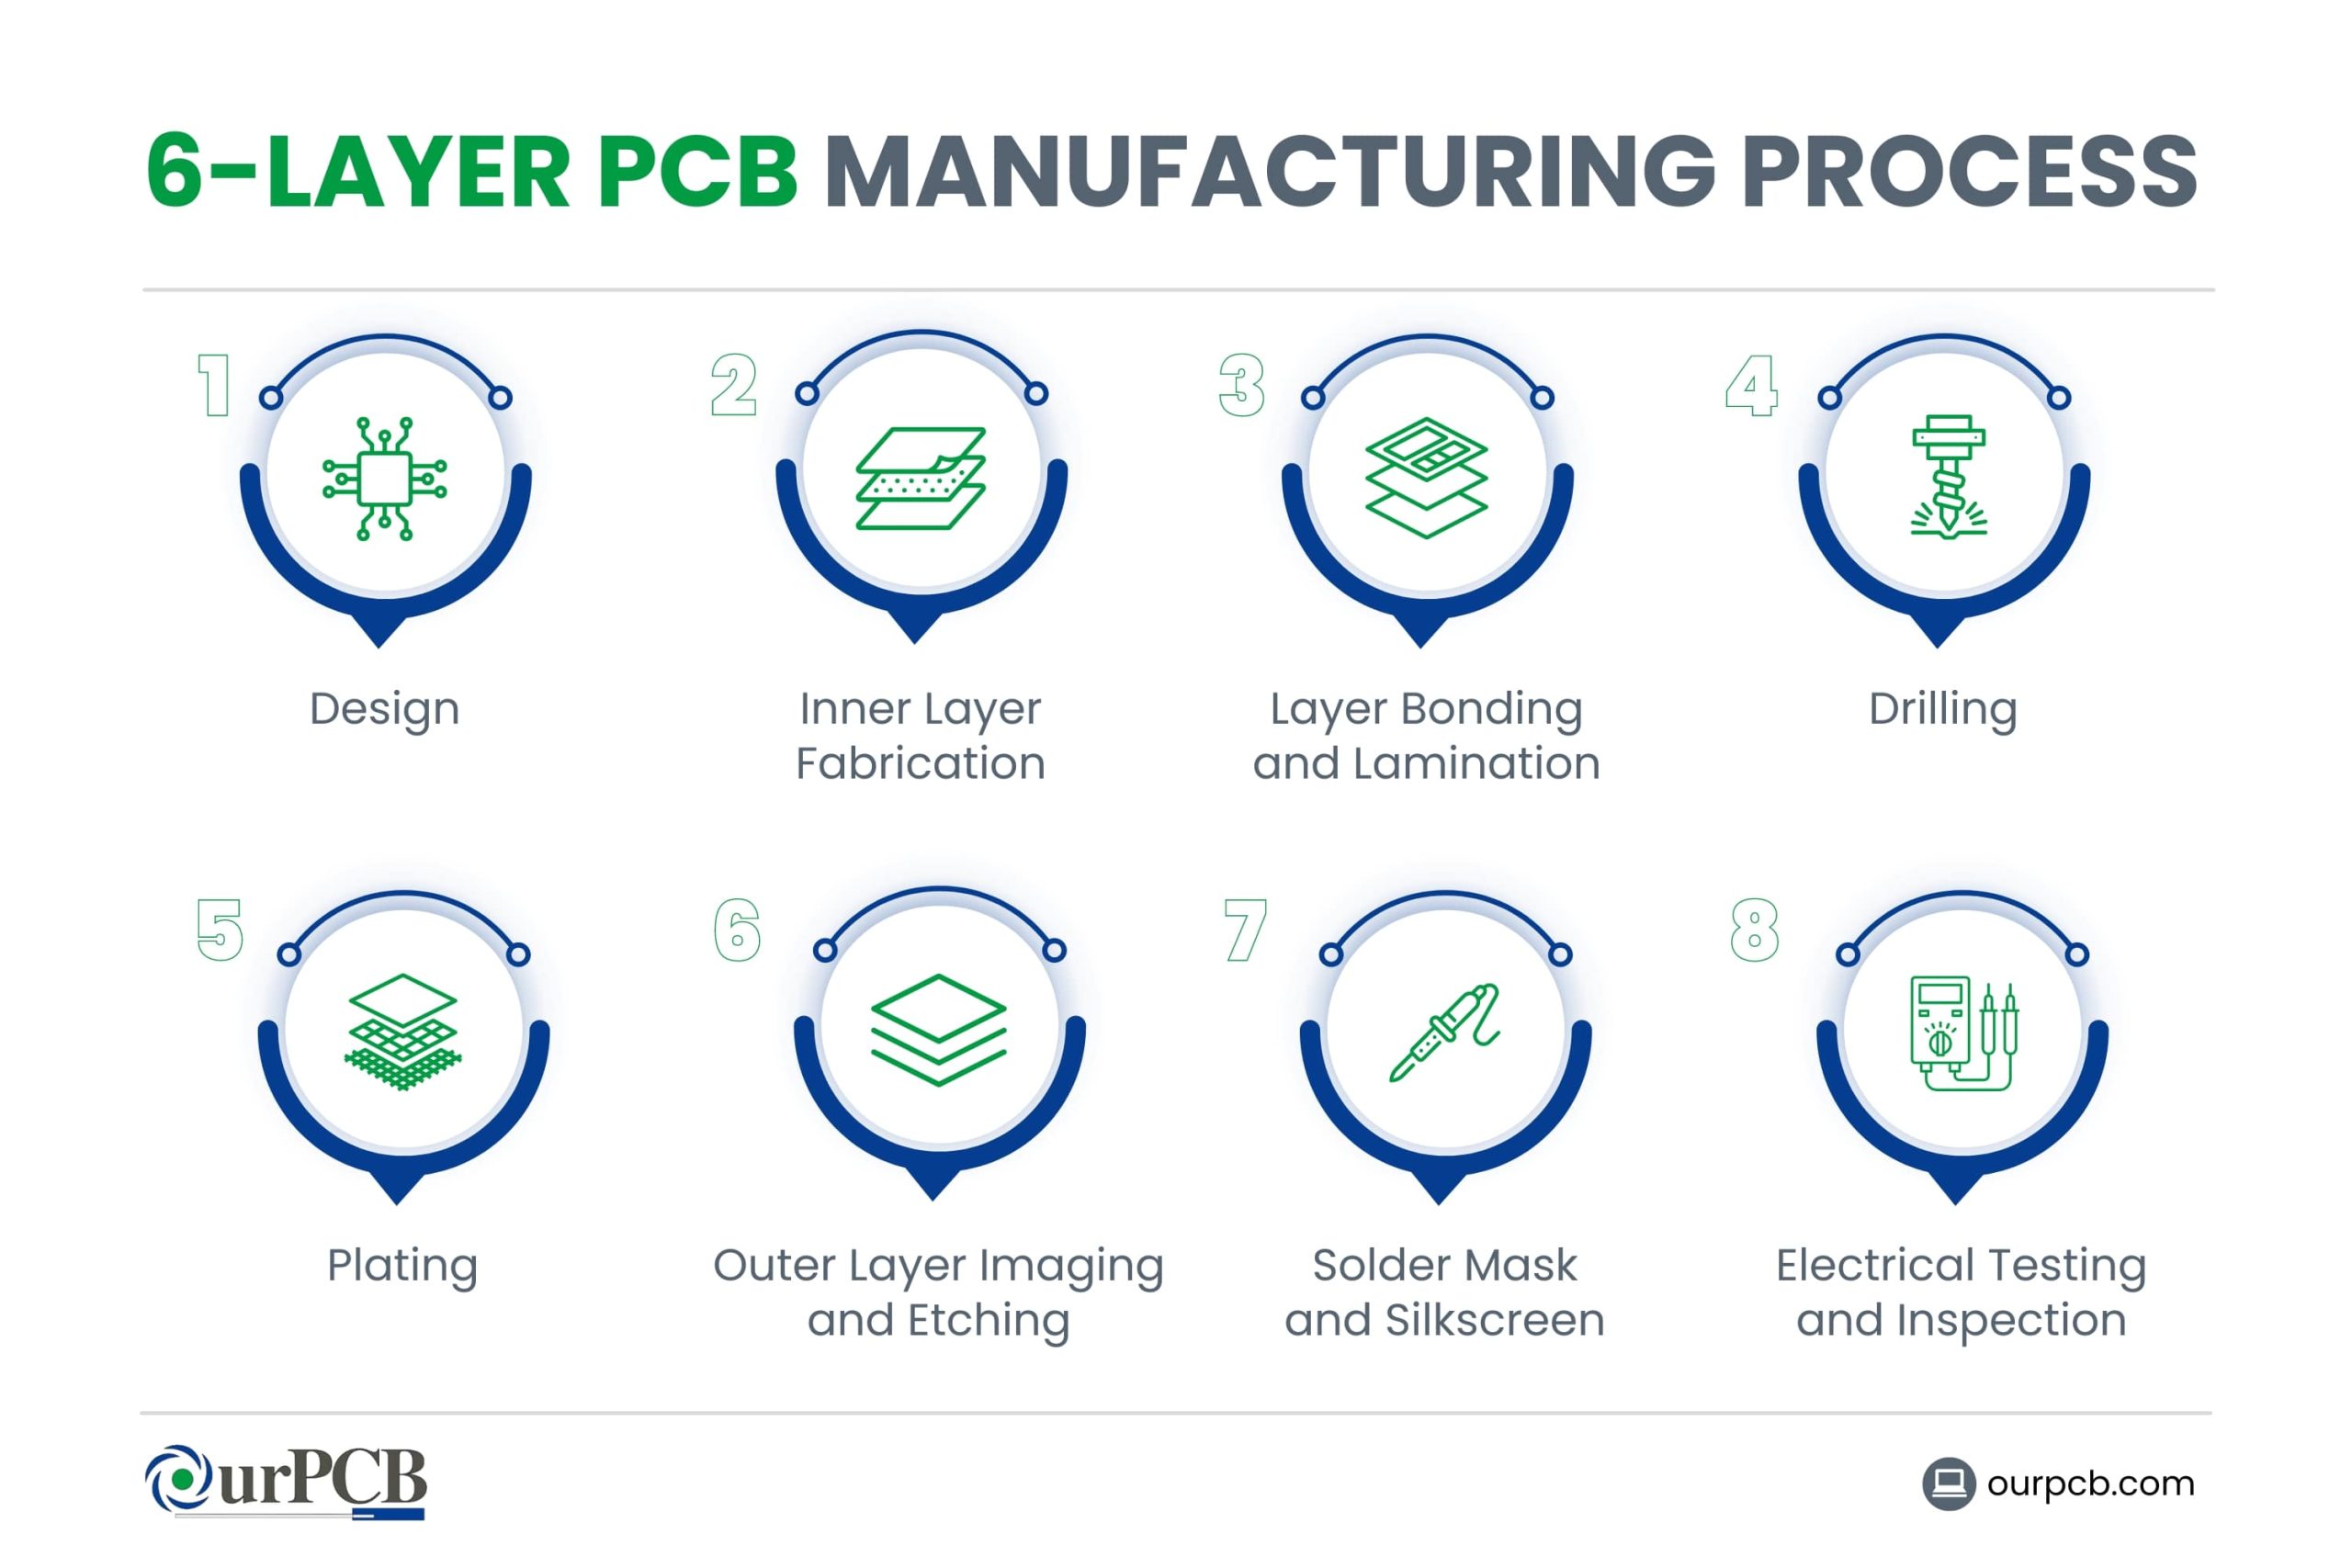 How Is a 6-Layer PCB Manufactured